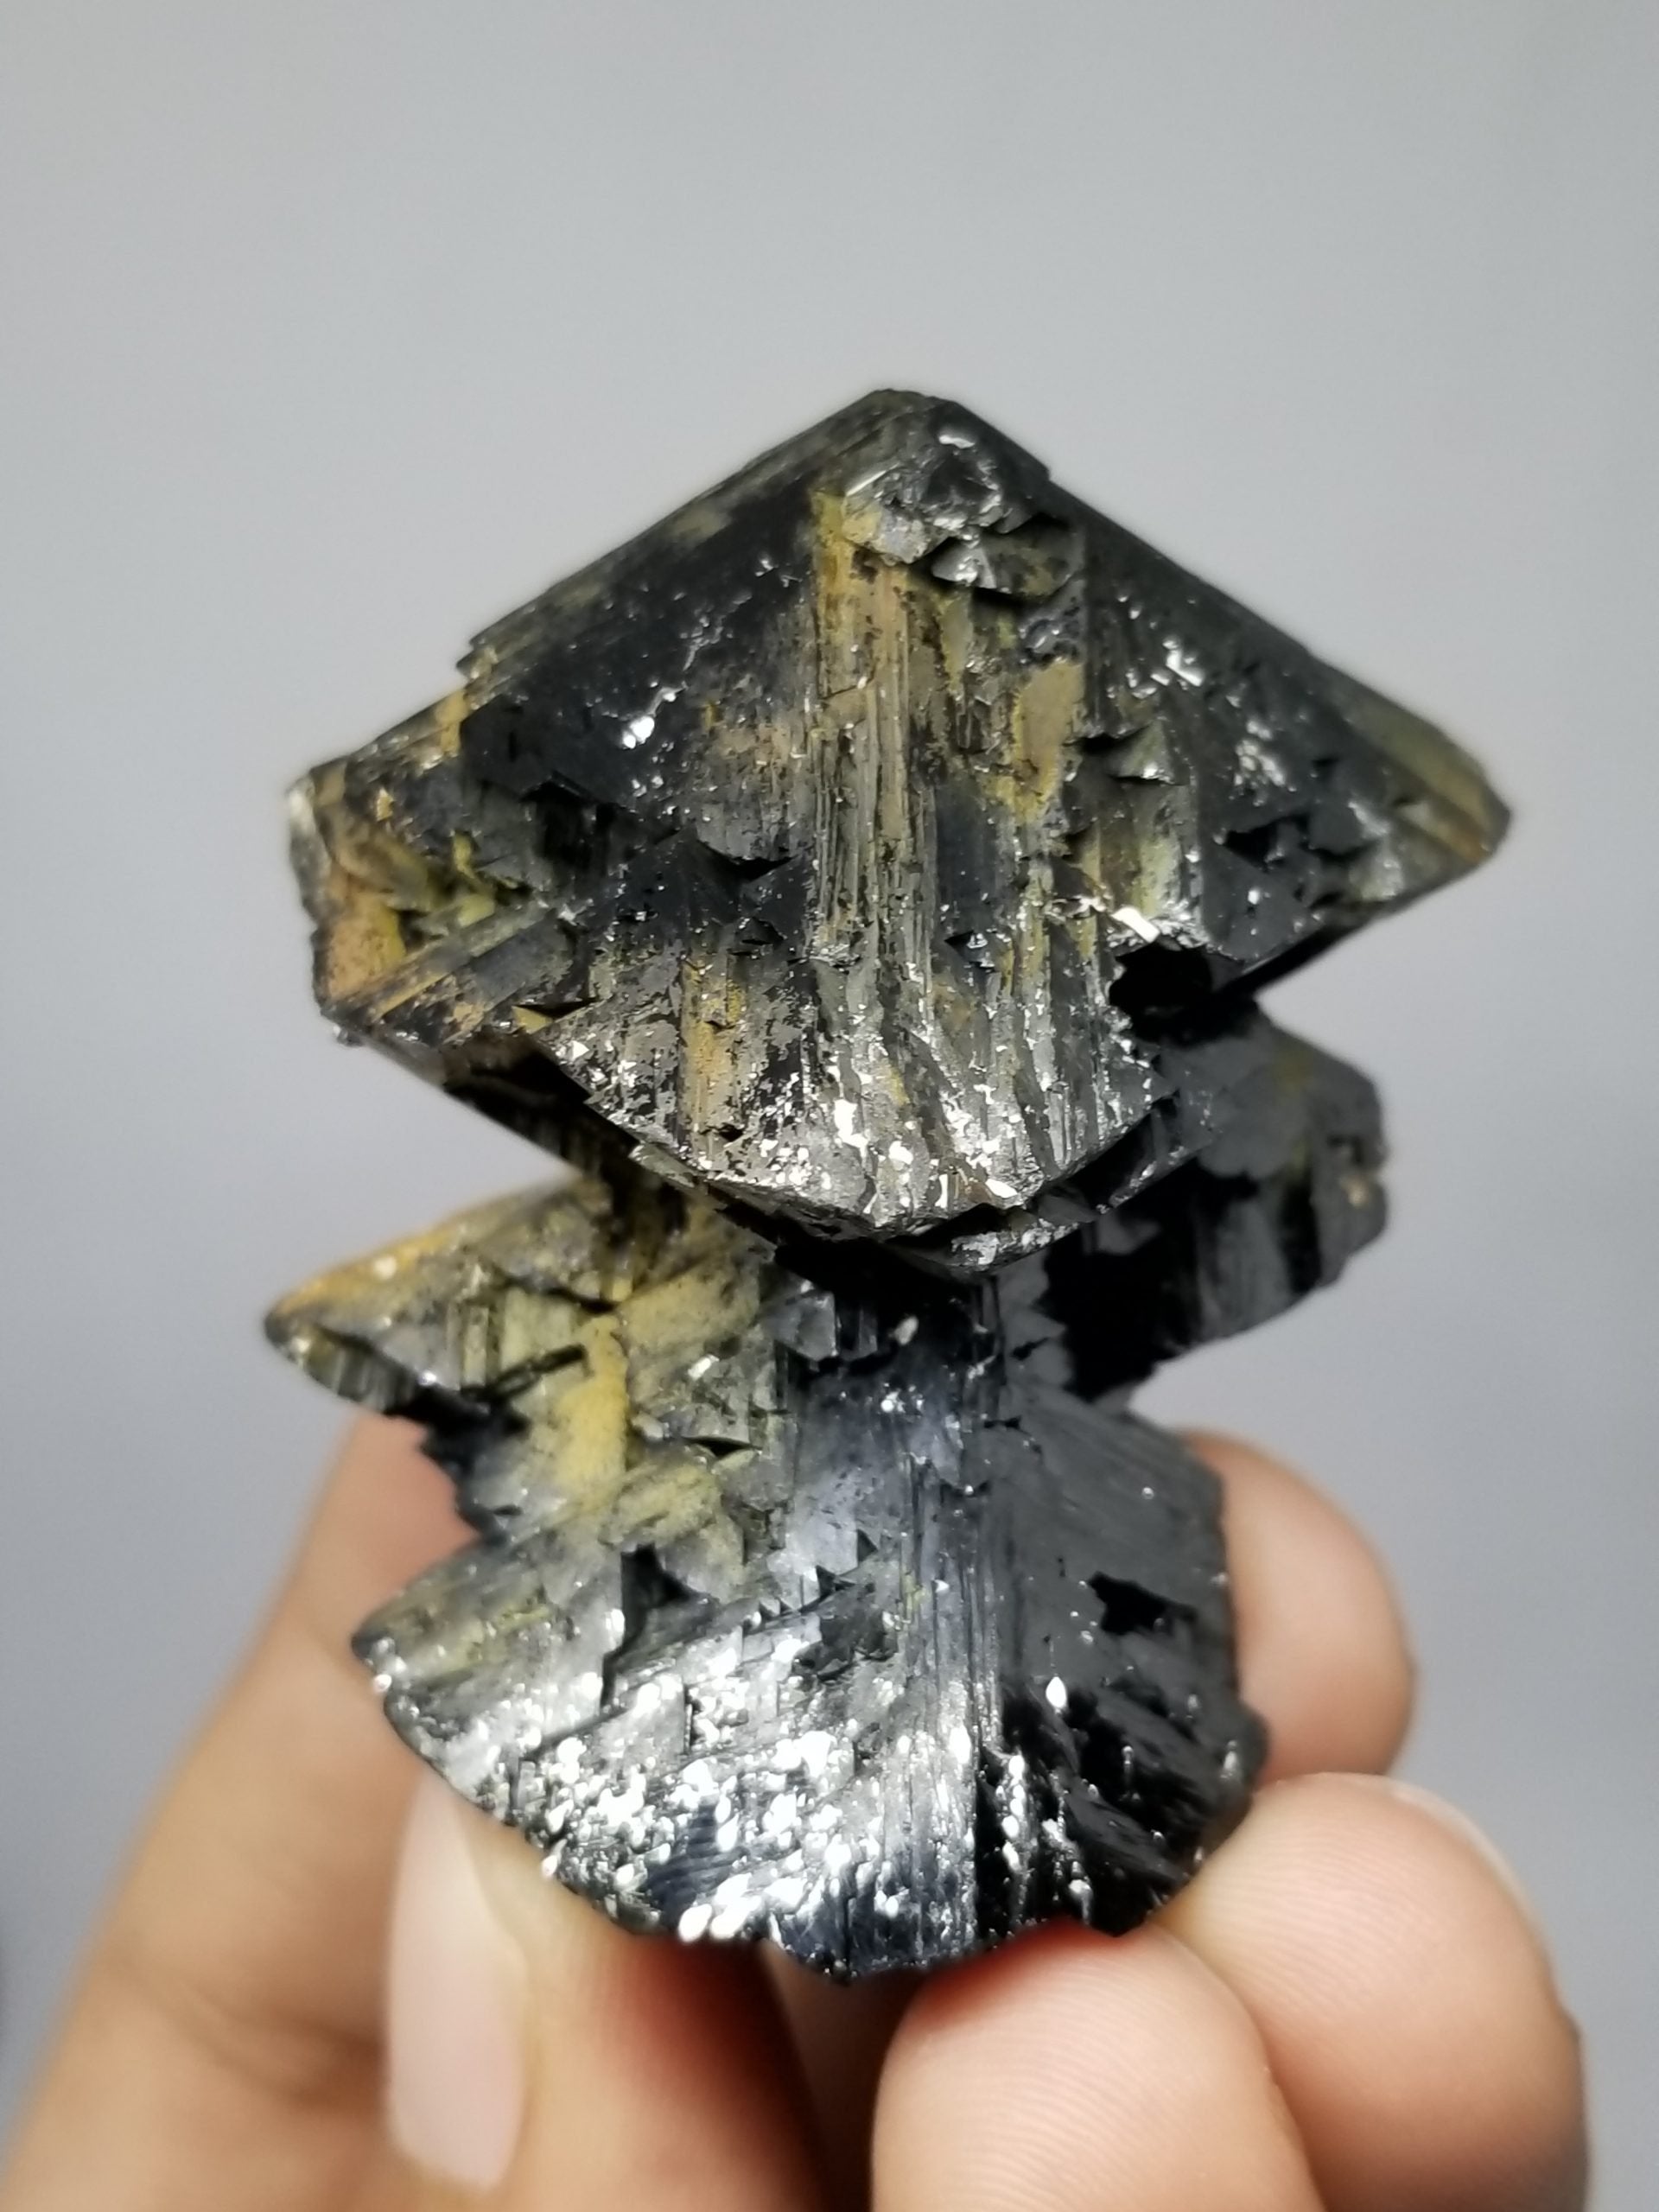 Cassiterite with nice crystal habit and shiny luster